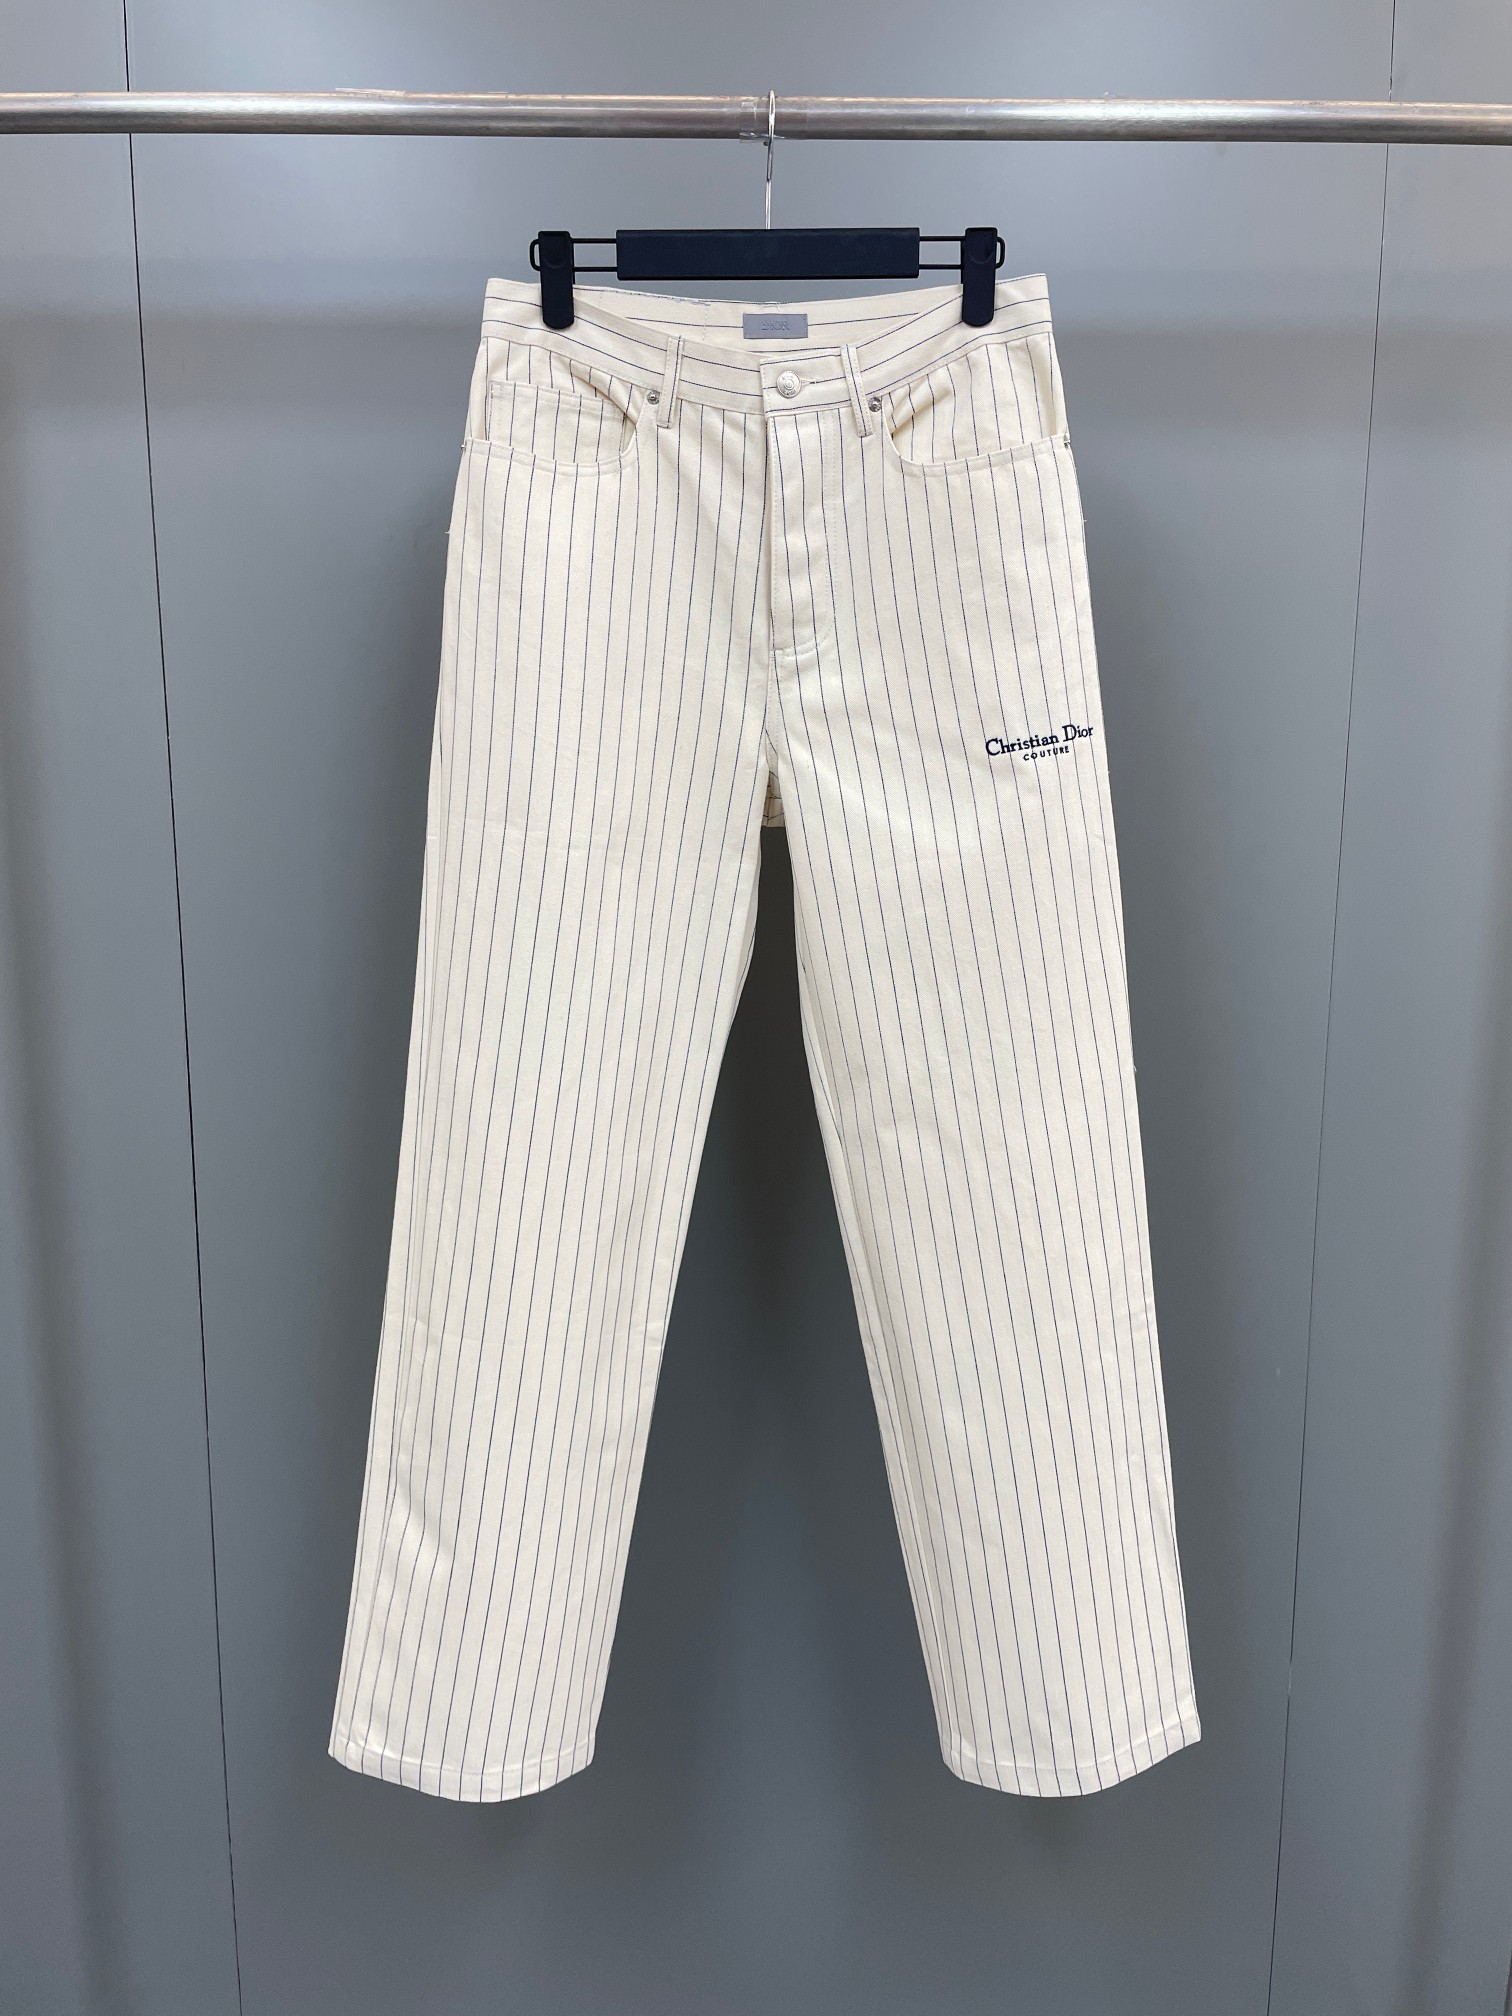 Dior Fashion
 Clothing Pants & Trousers Shirts & Blouses Beige White Embroidery Cotton Denim Spring/Summer Collection